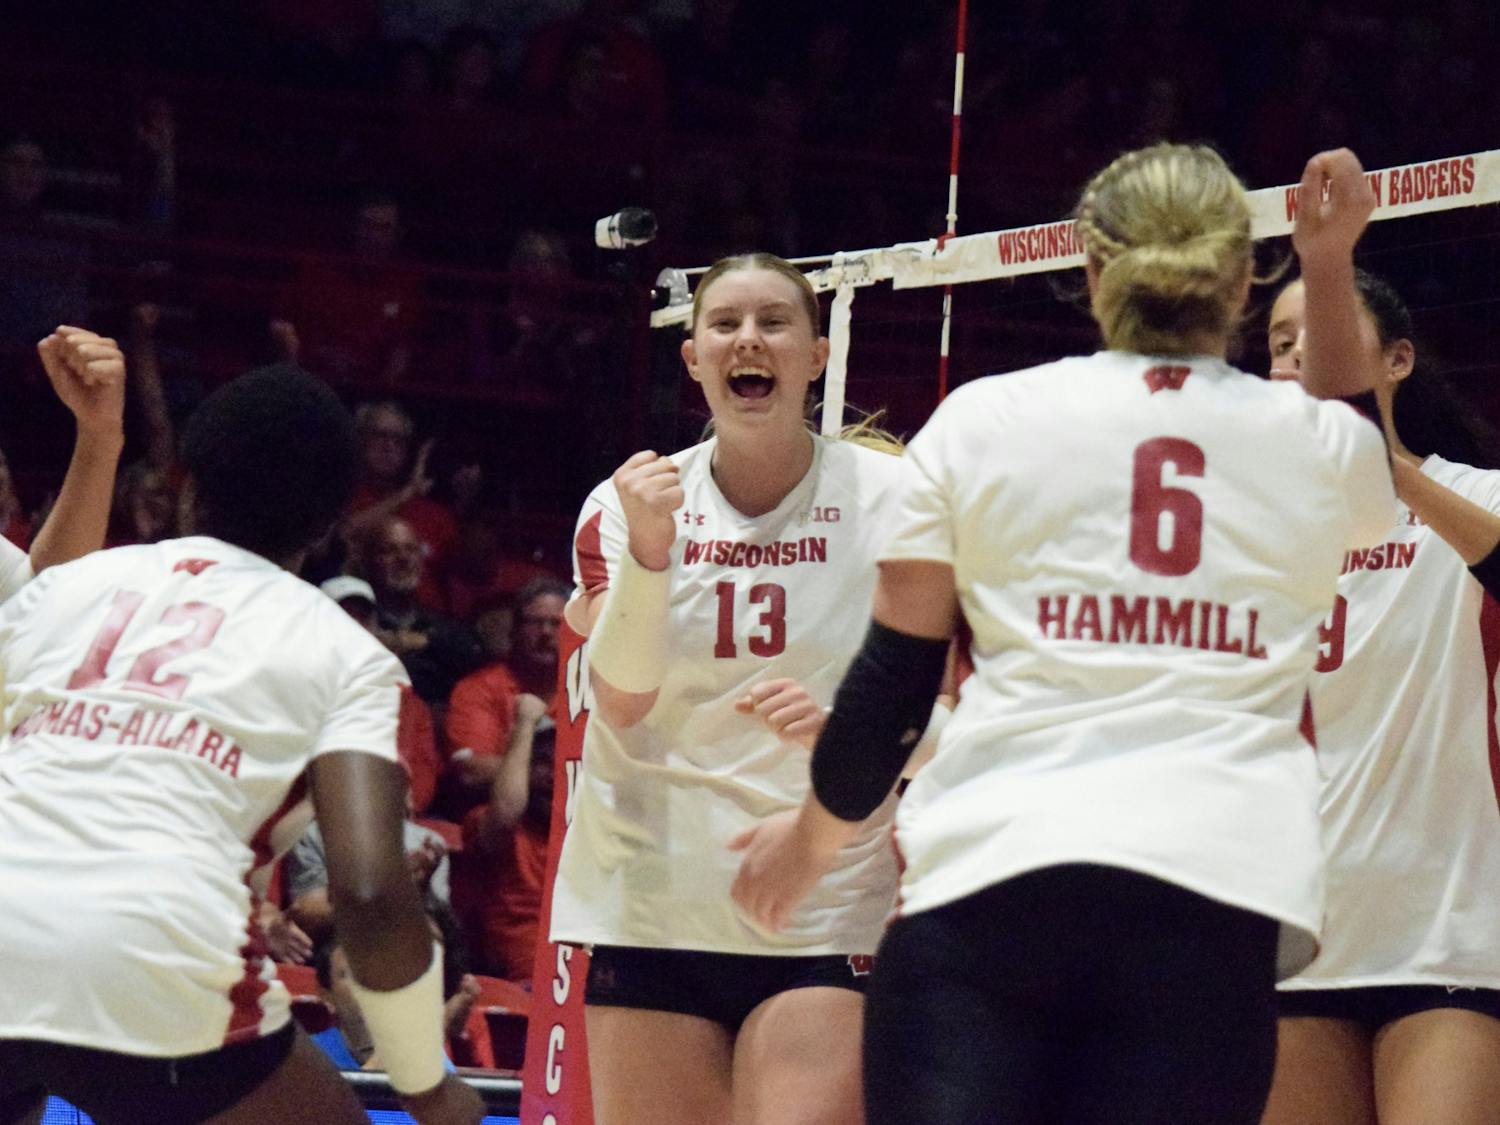 PHOTOS: Wisconsin Volleyball takes down Arizona in a 3-0 game